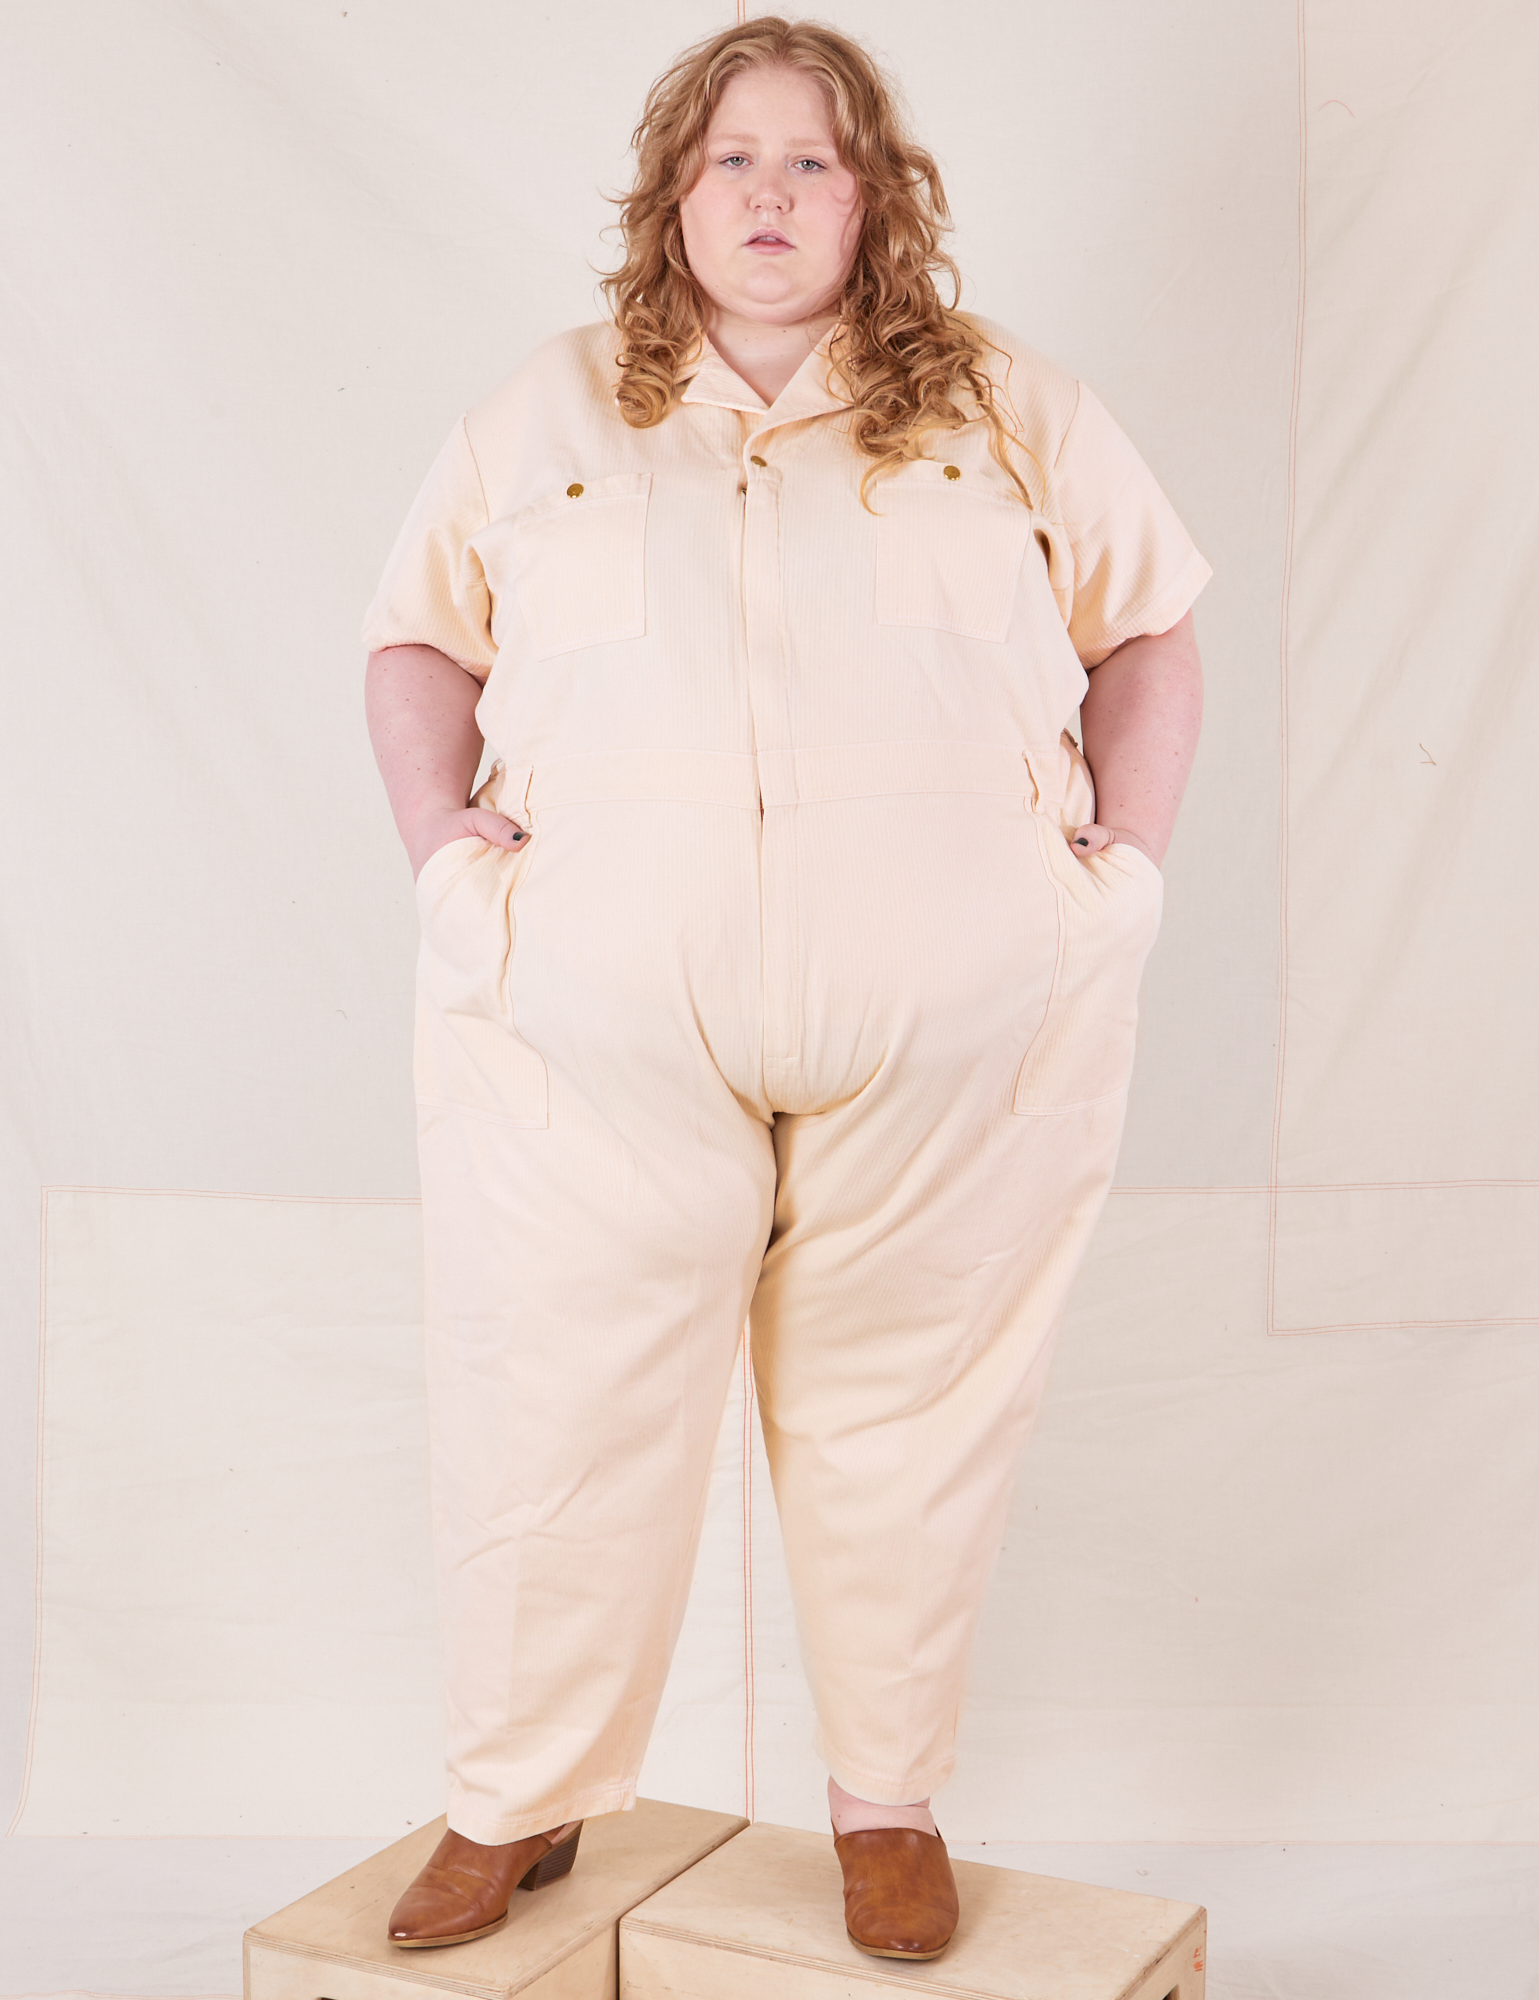 Catie is 5&#39;11&quot; and wearing size 5XL Heritage Short Sleeve Jumpsuit in Natural